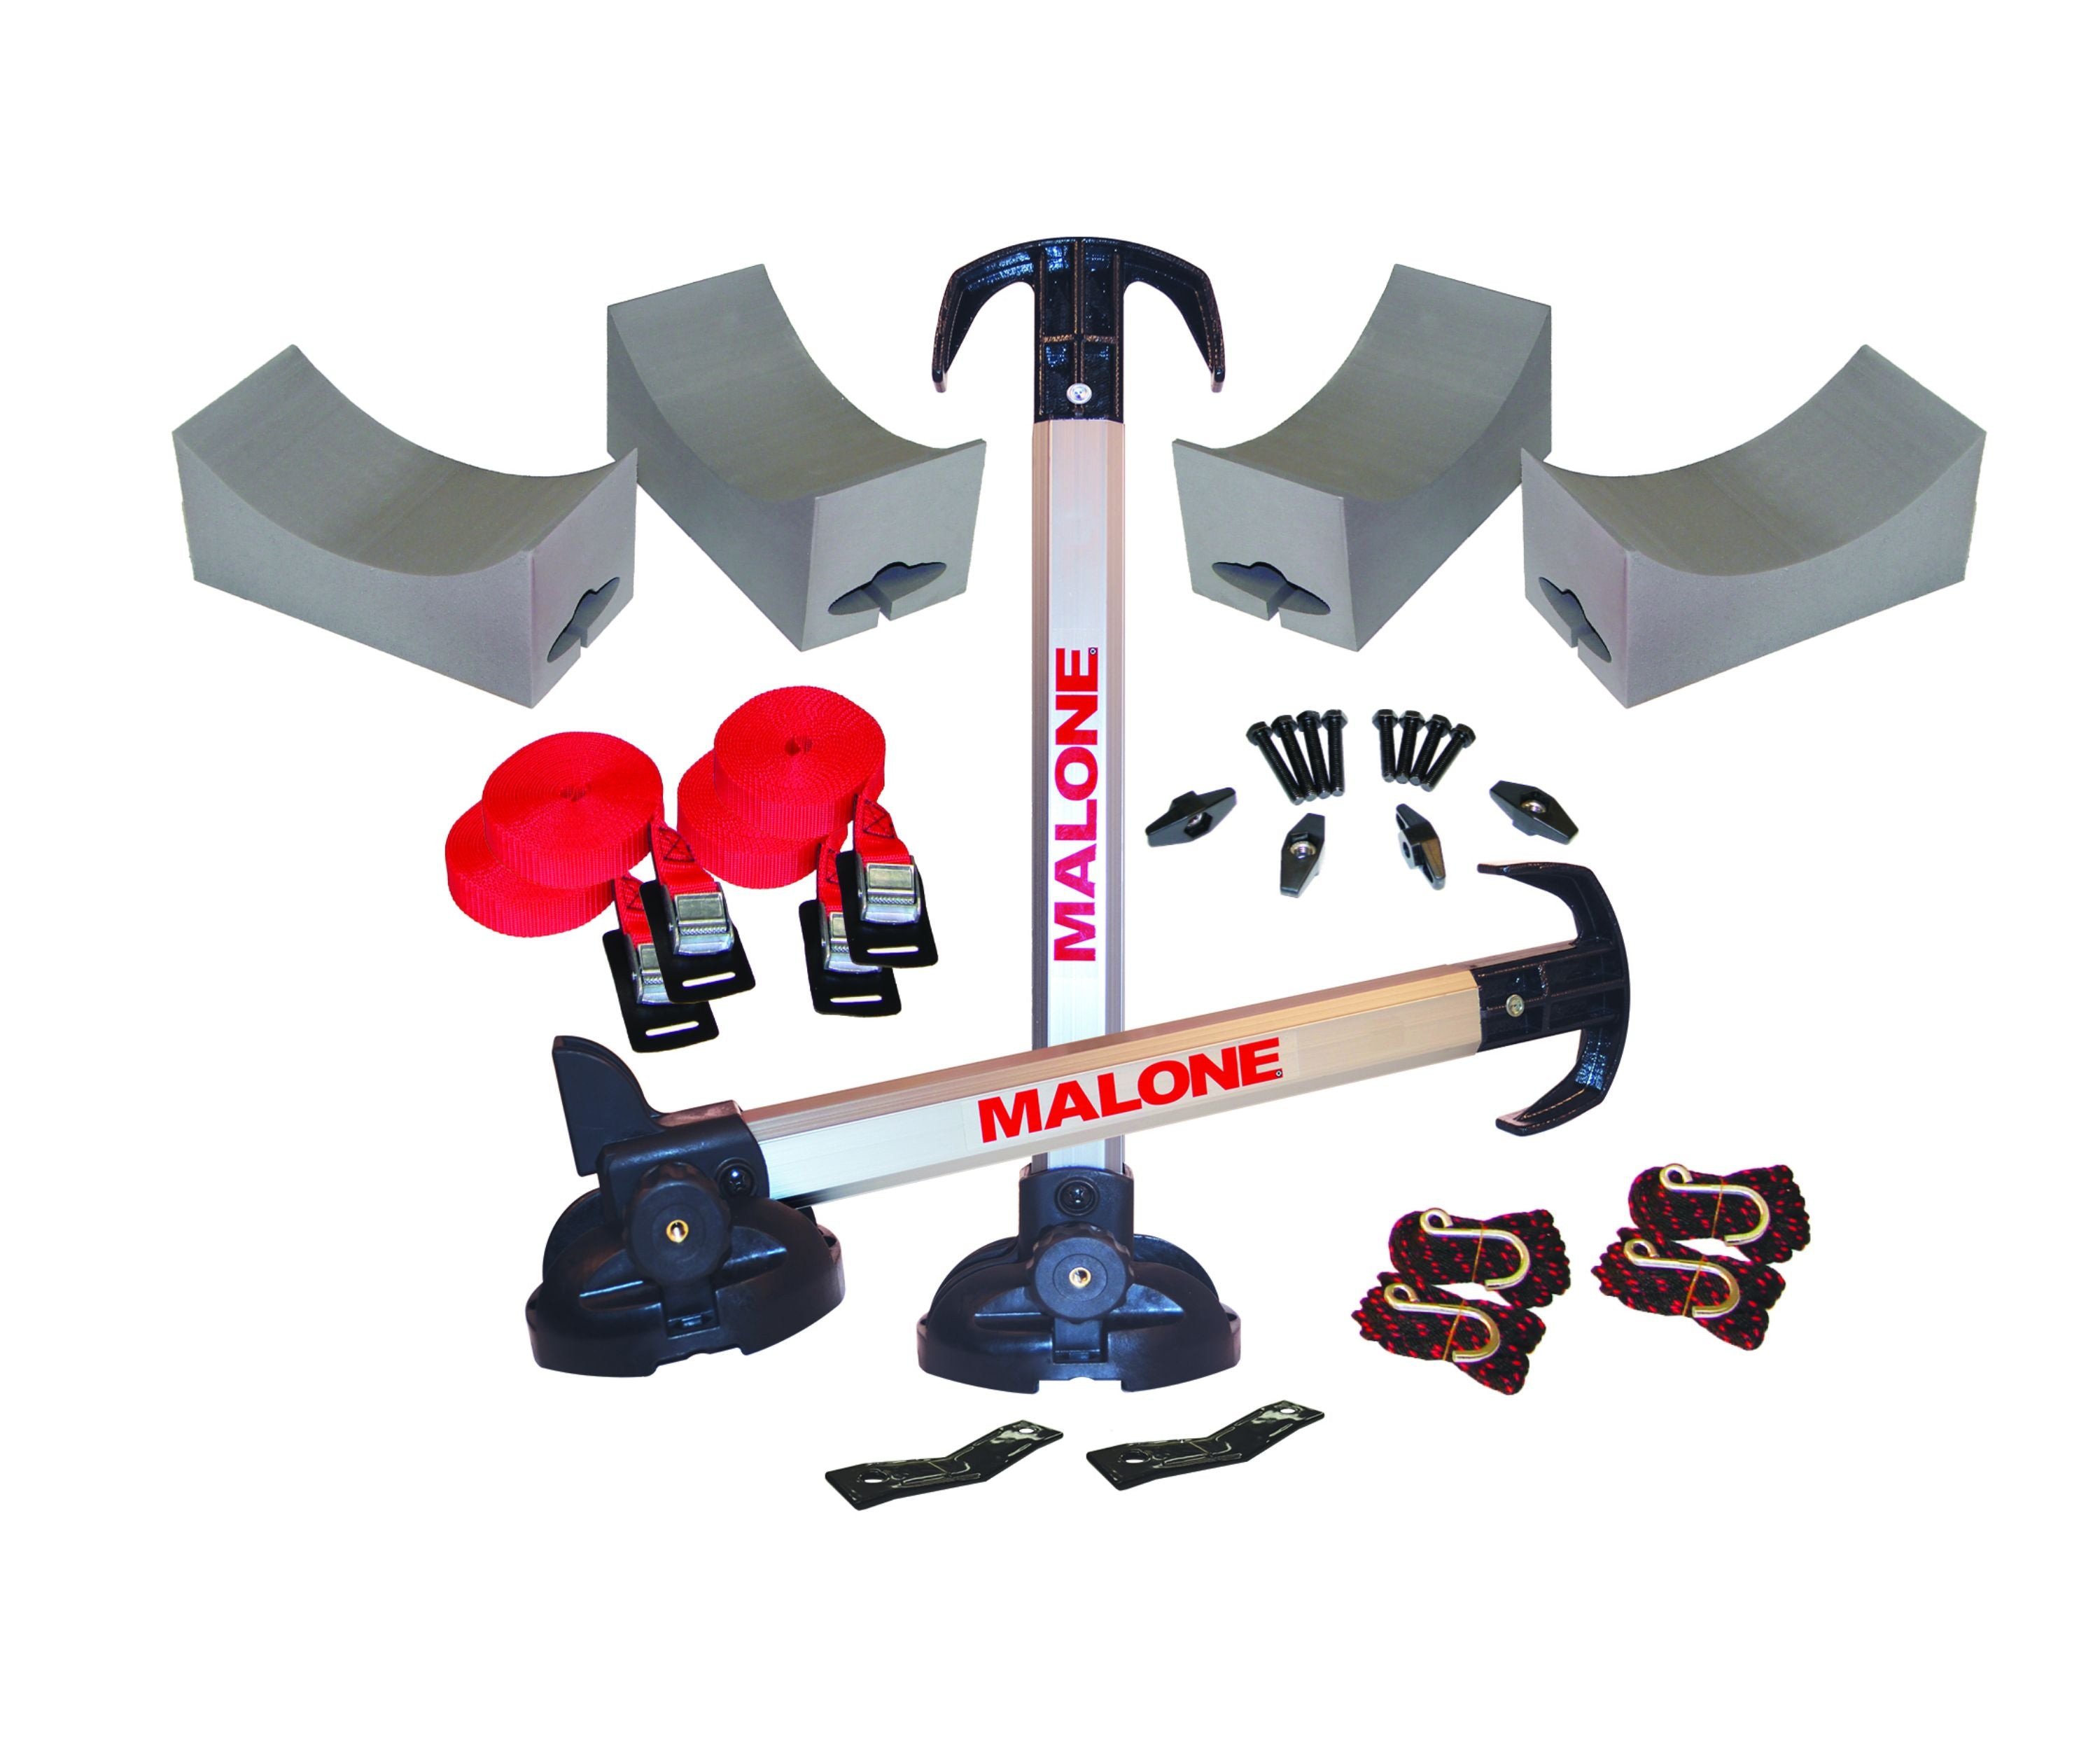 Malone Stax Pro 2 Kayak Carrier - Gear For Adventure